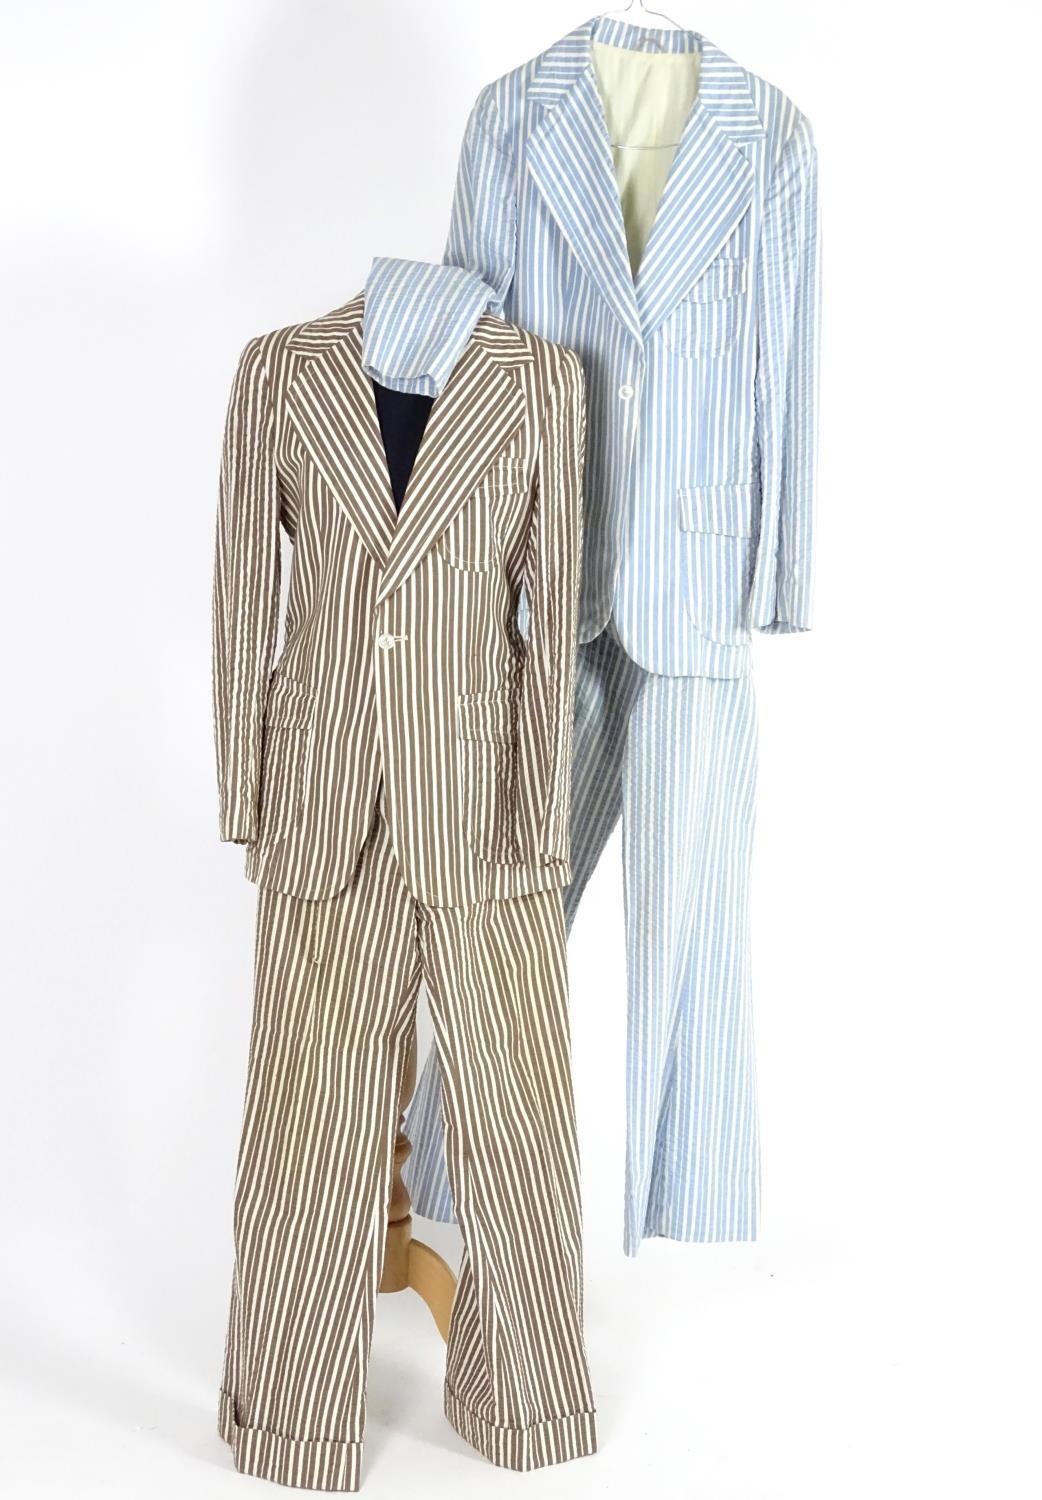 2 vintage stripy suits by Austins, a light brown and cream striped jacket and trousers along with